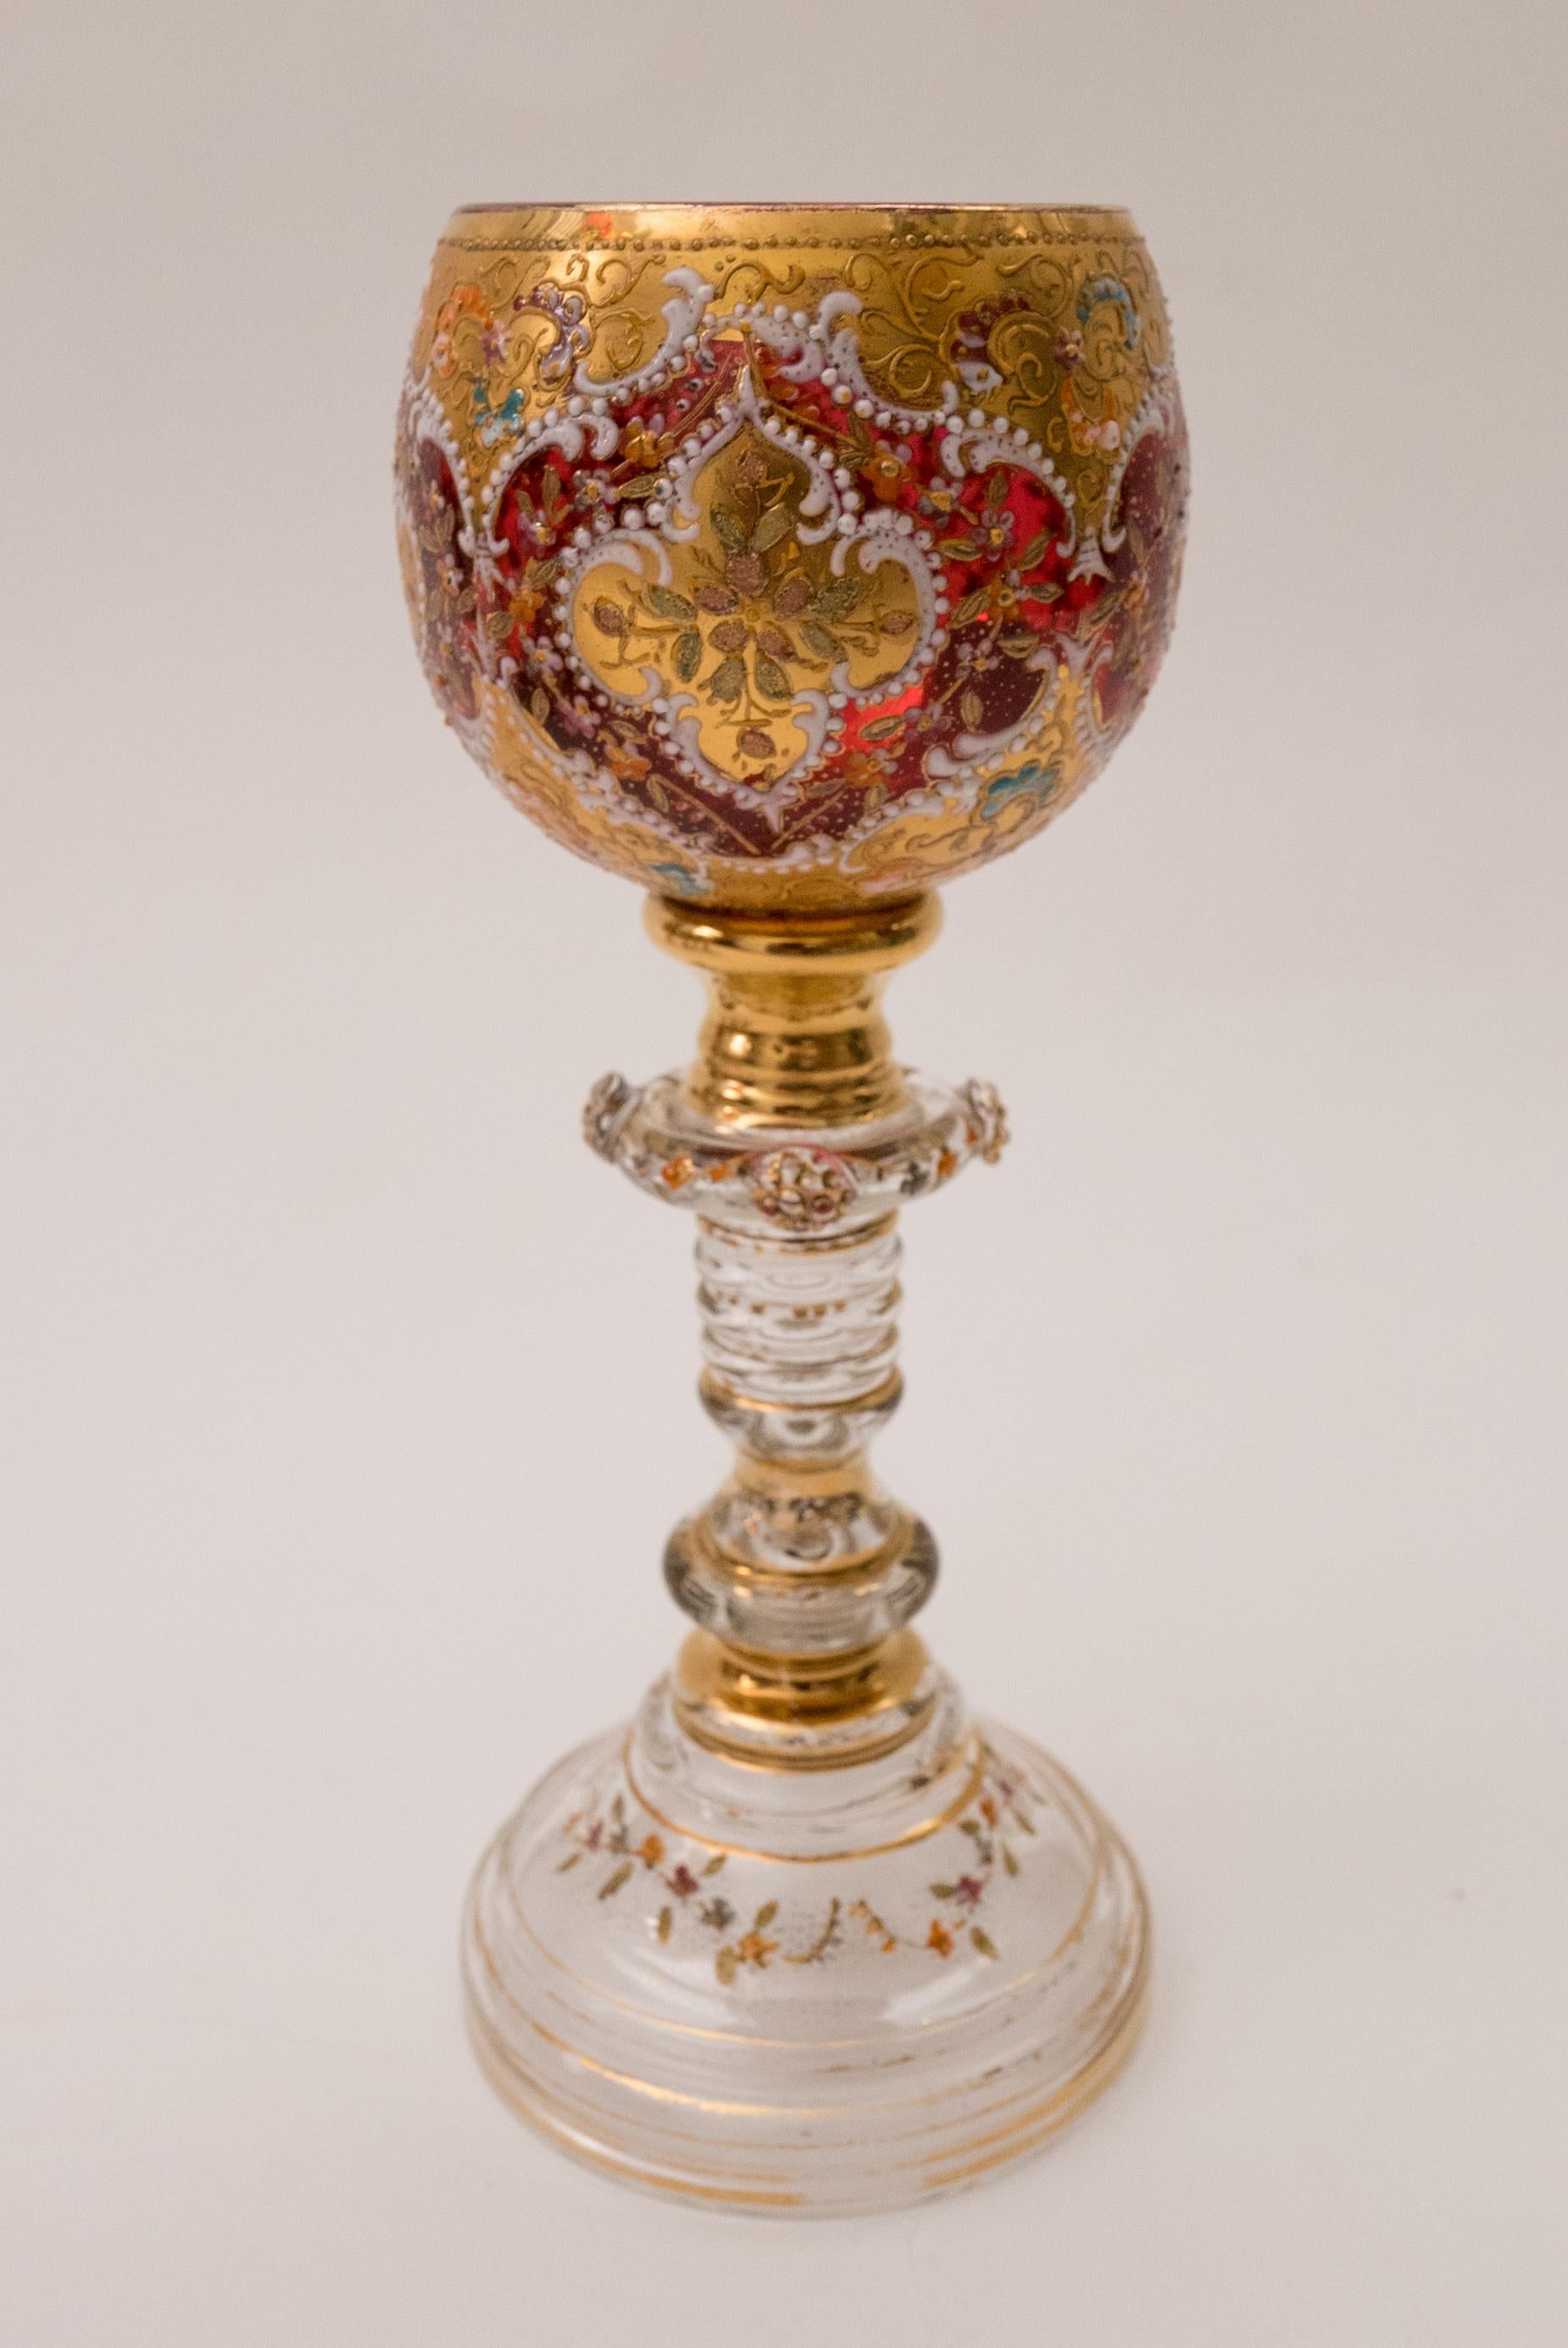 A fantastic set of 8 wine glasses from the storied glass firm of Moser. They have intricate enameling on 24 karat gold on their ruby bowls along with applied prunts to their knob stems and stepped base. Truly incredible craftsmanship. All are in